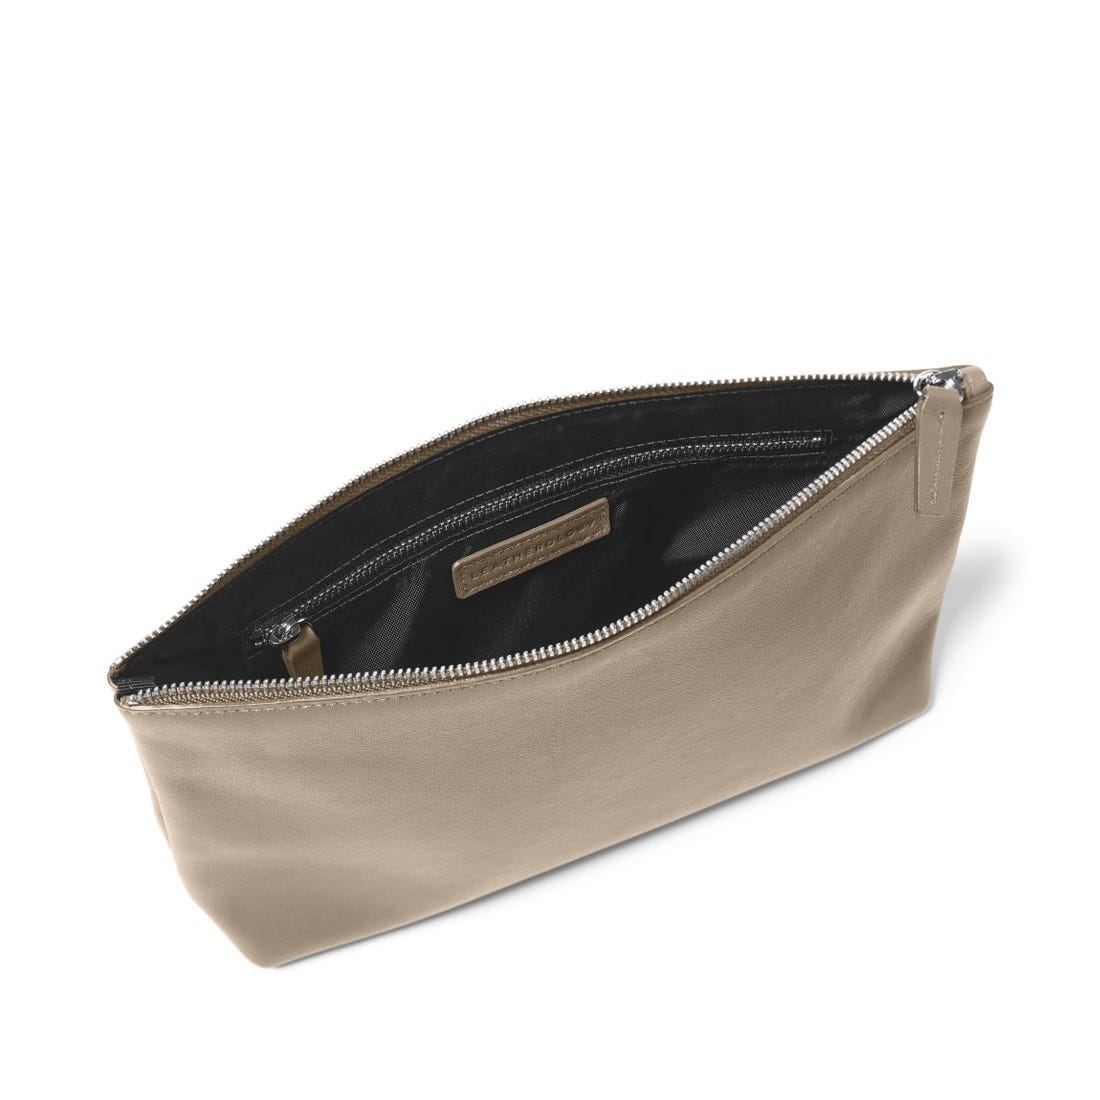 Medium Accessories Pouch by Leatherology